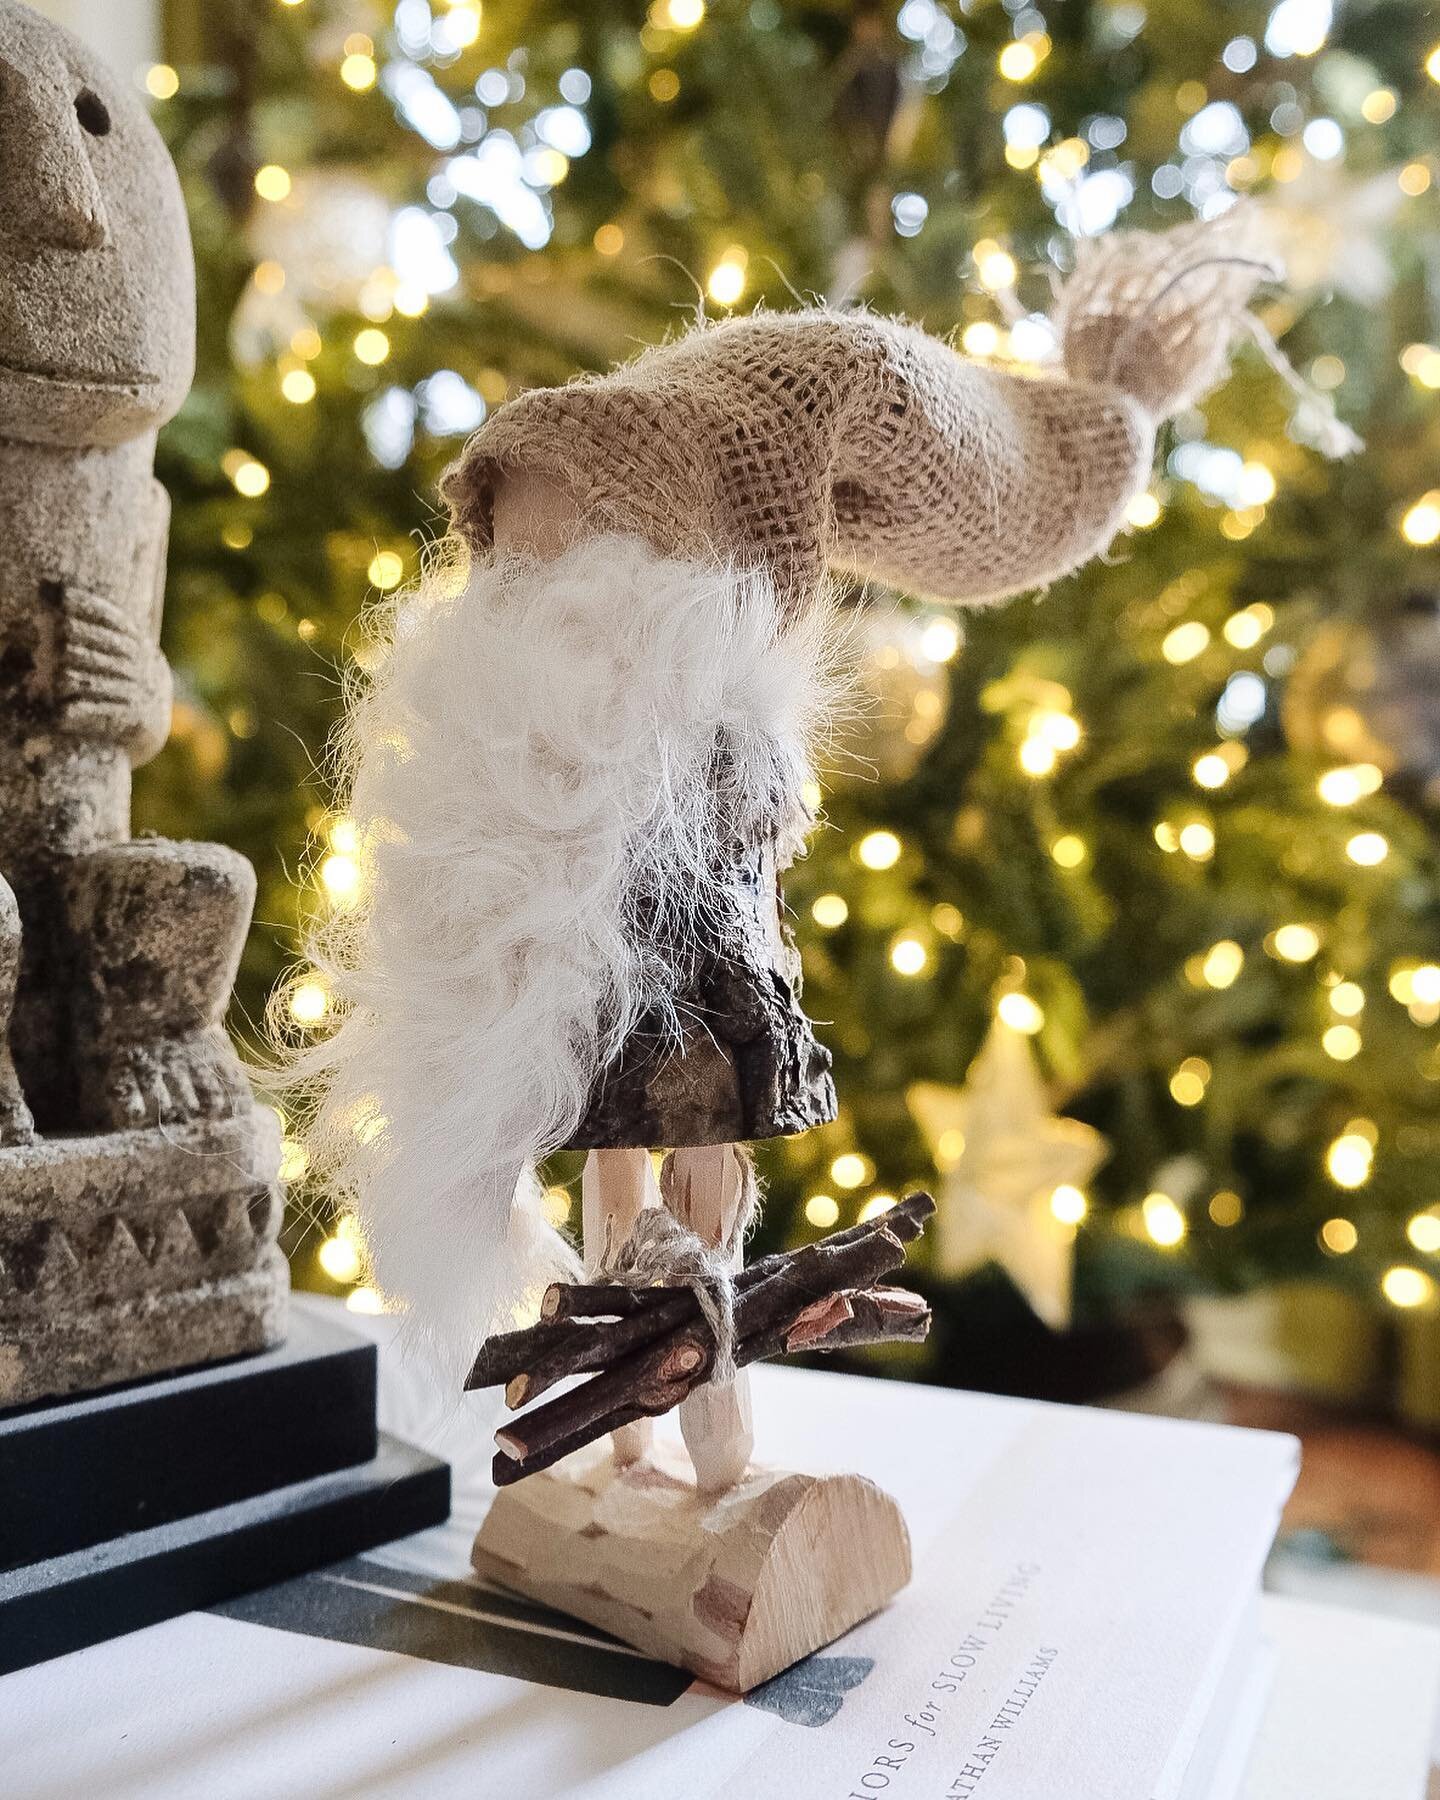 Unboxing the j&oacute;la&aacute;lfur or Christmas elf is one of my favorite parts of the holiday season. This cheeky lil guy was custom made by the incredible @birchandwool when I was in Iceland 🇮🇸 a few Decembers ago. Missing the Scandinavian holi